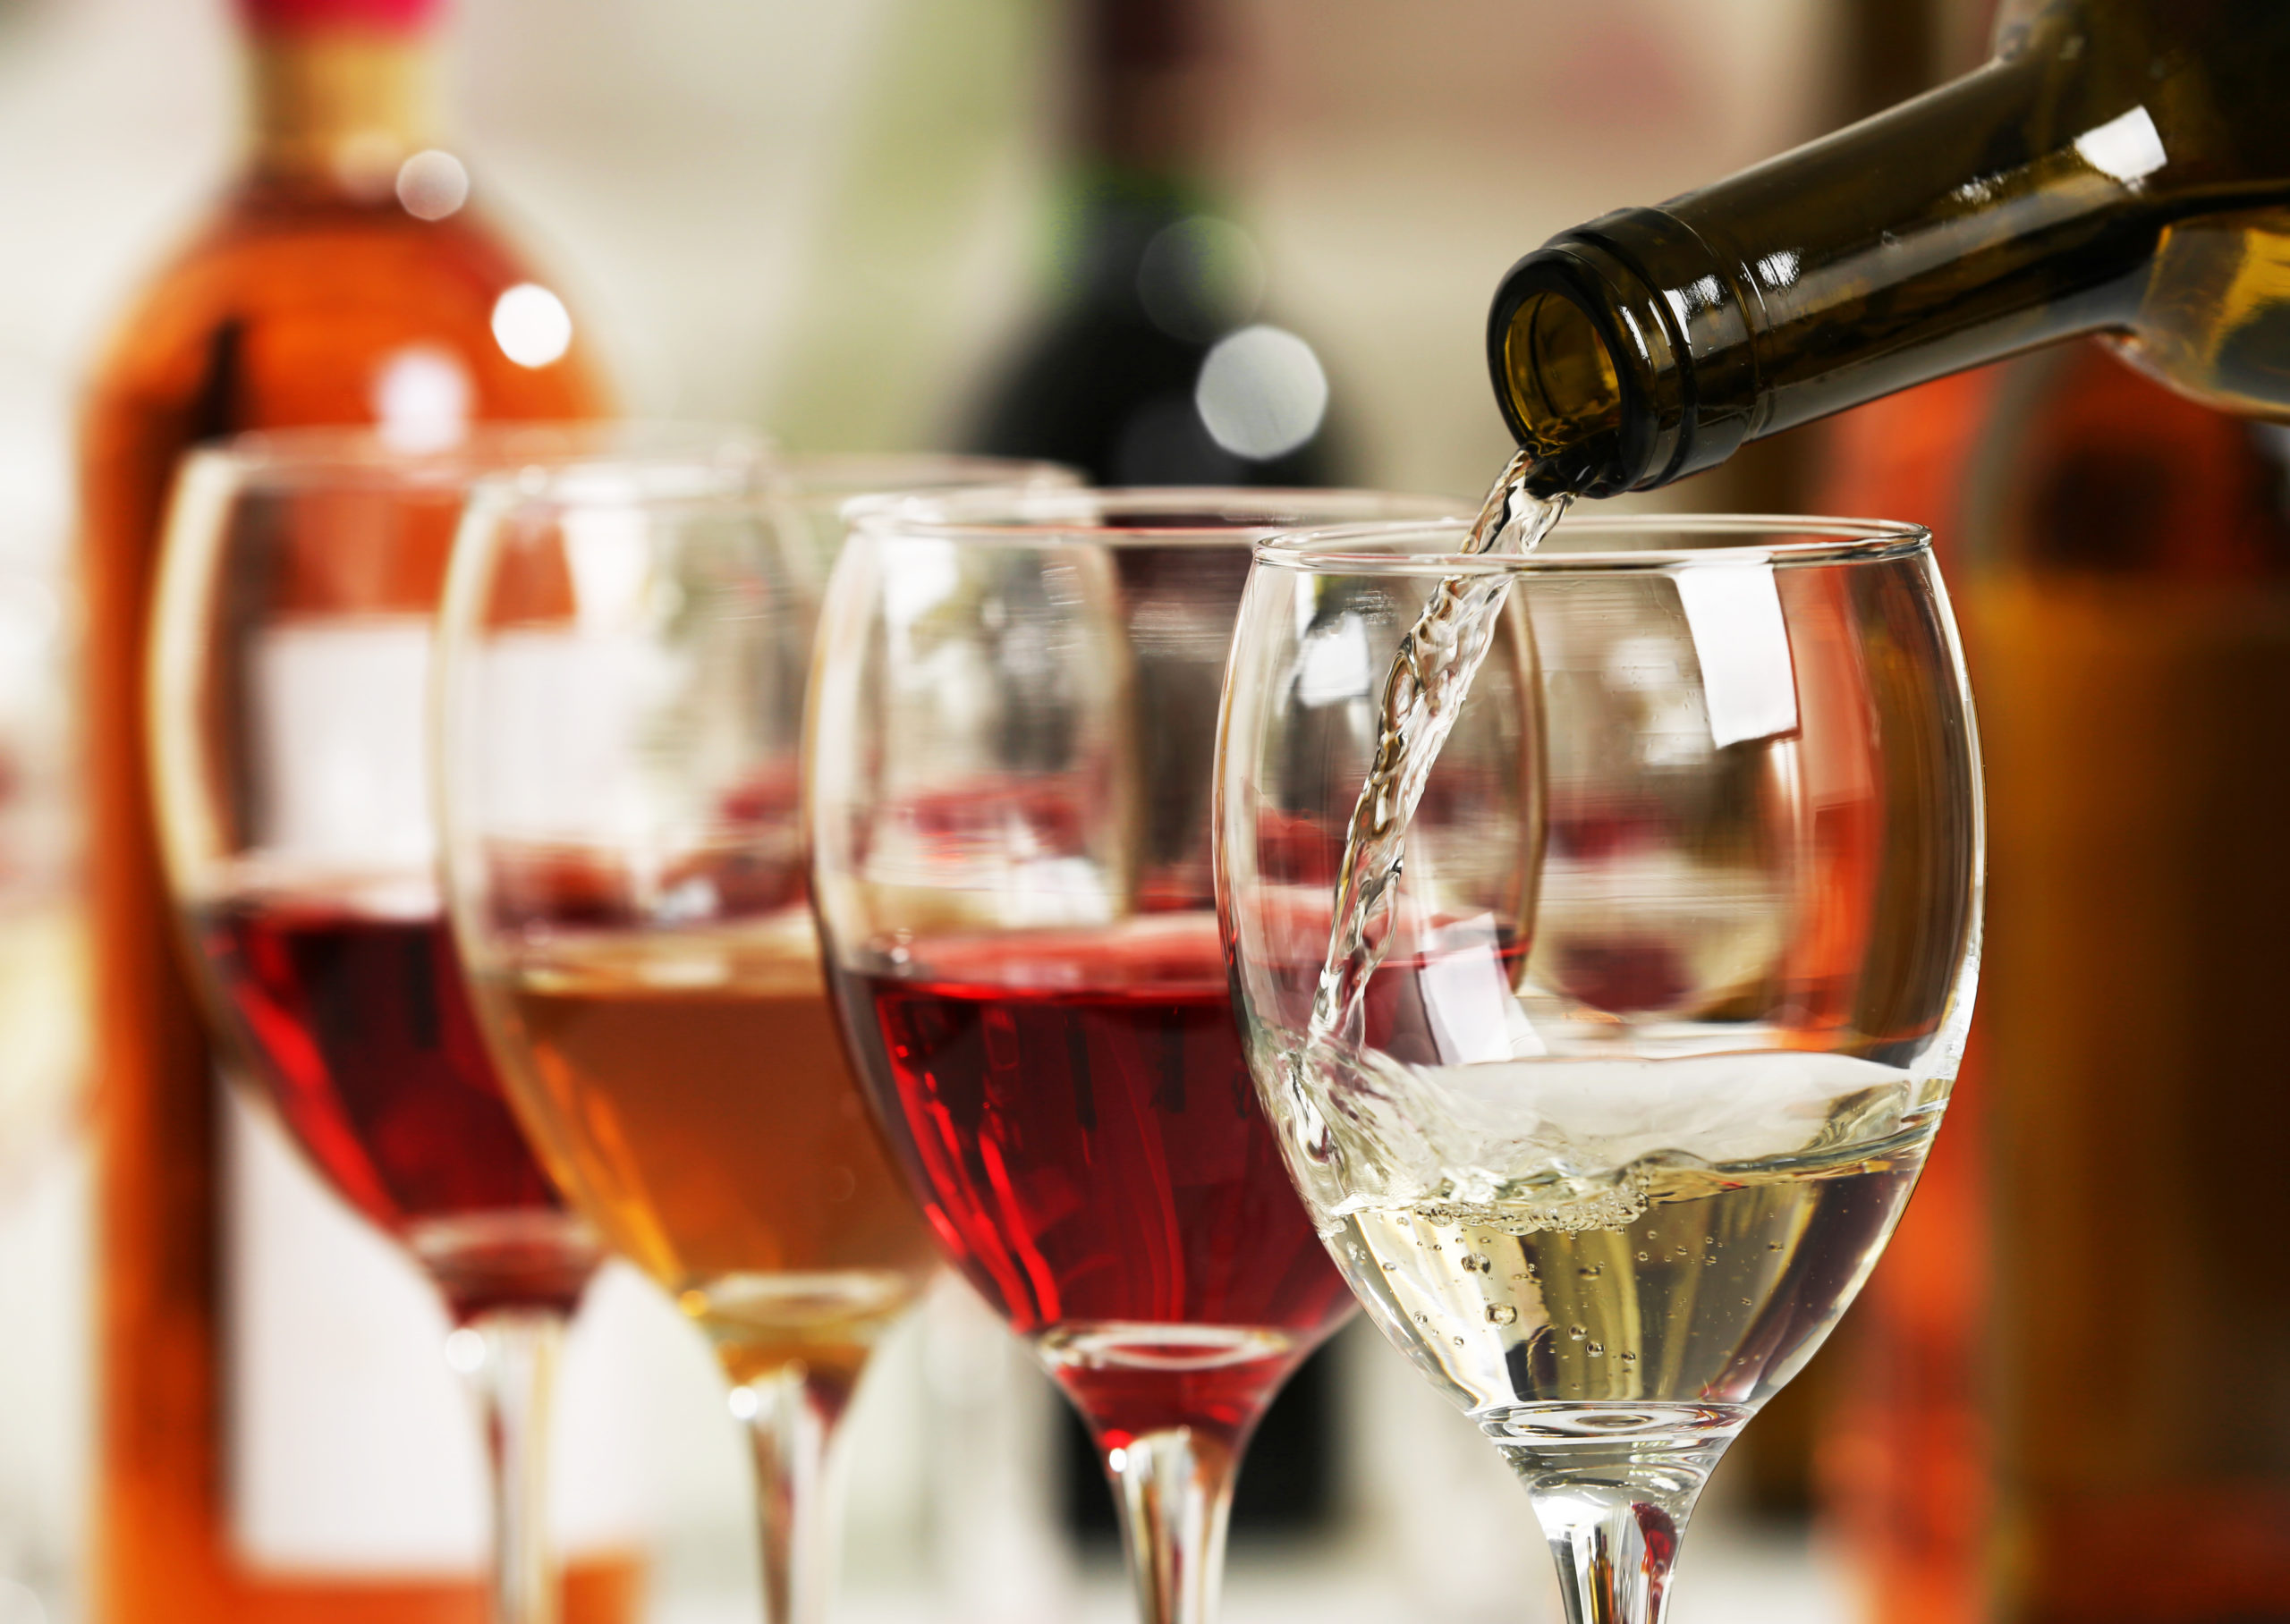 The Best Tips for Serving and Enjoying Wine